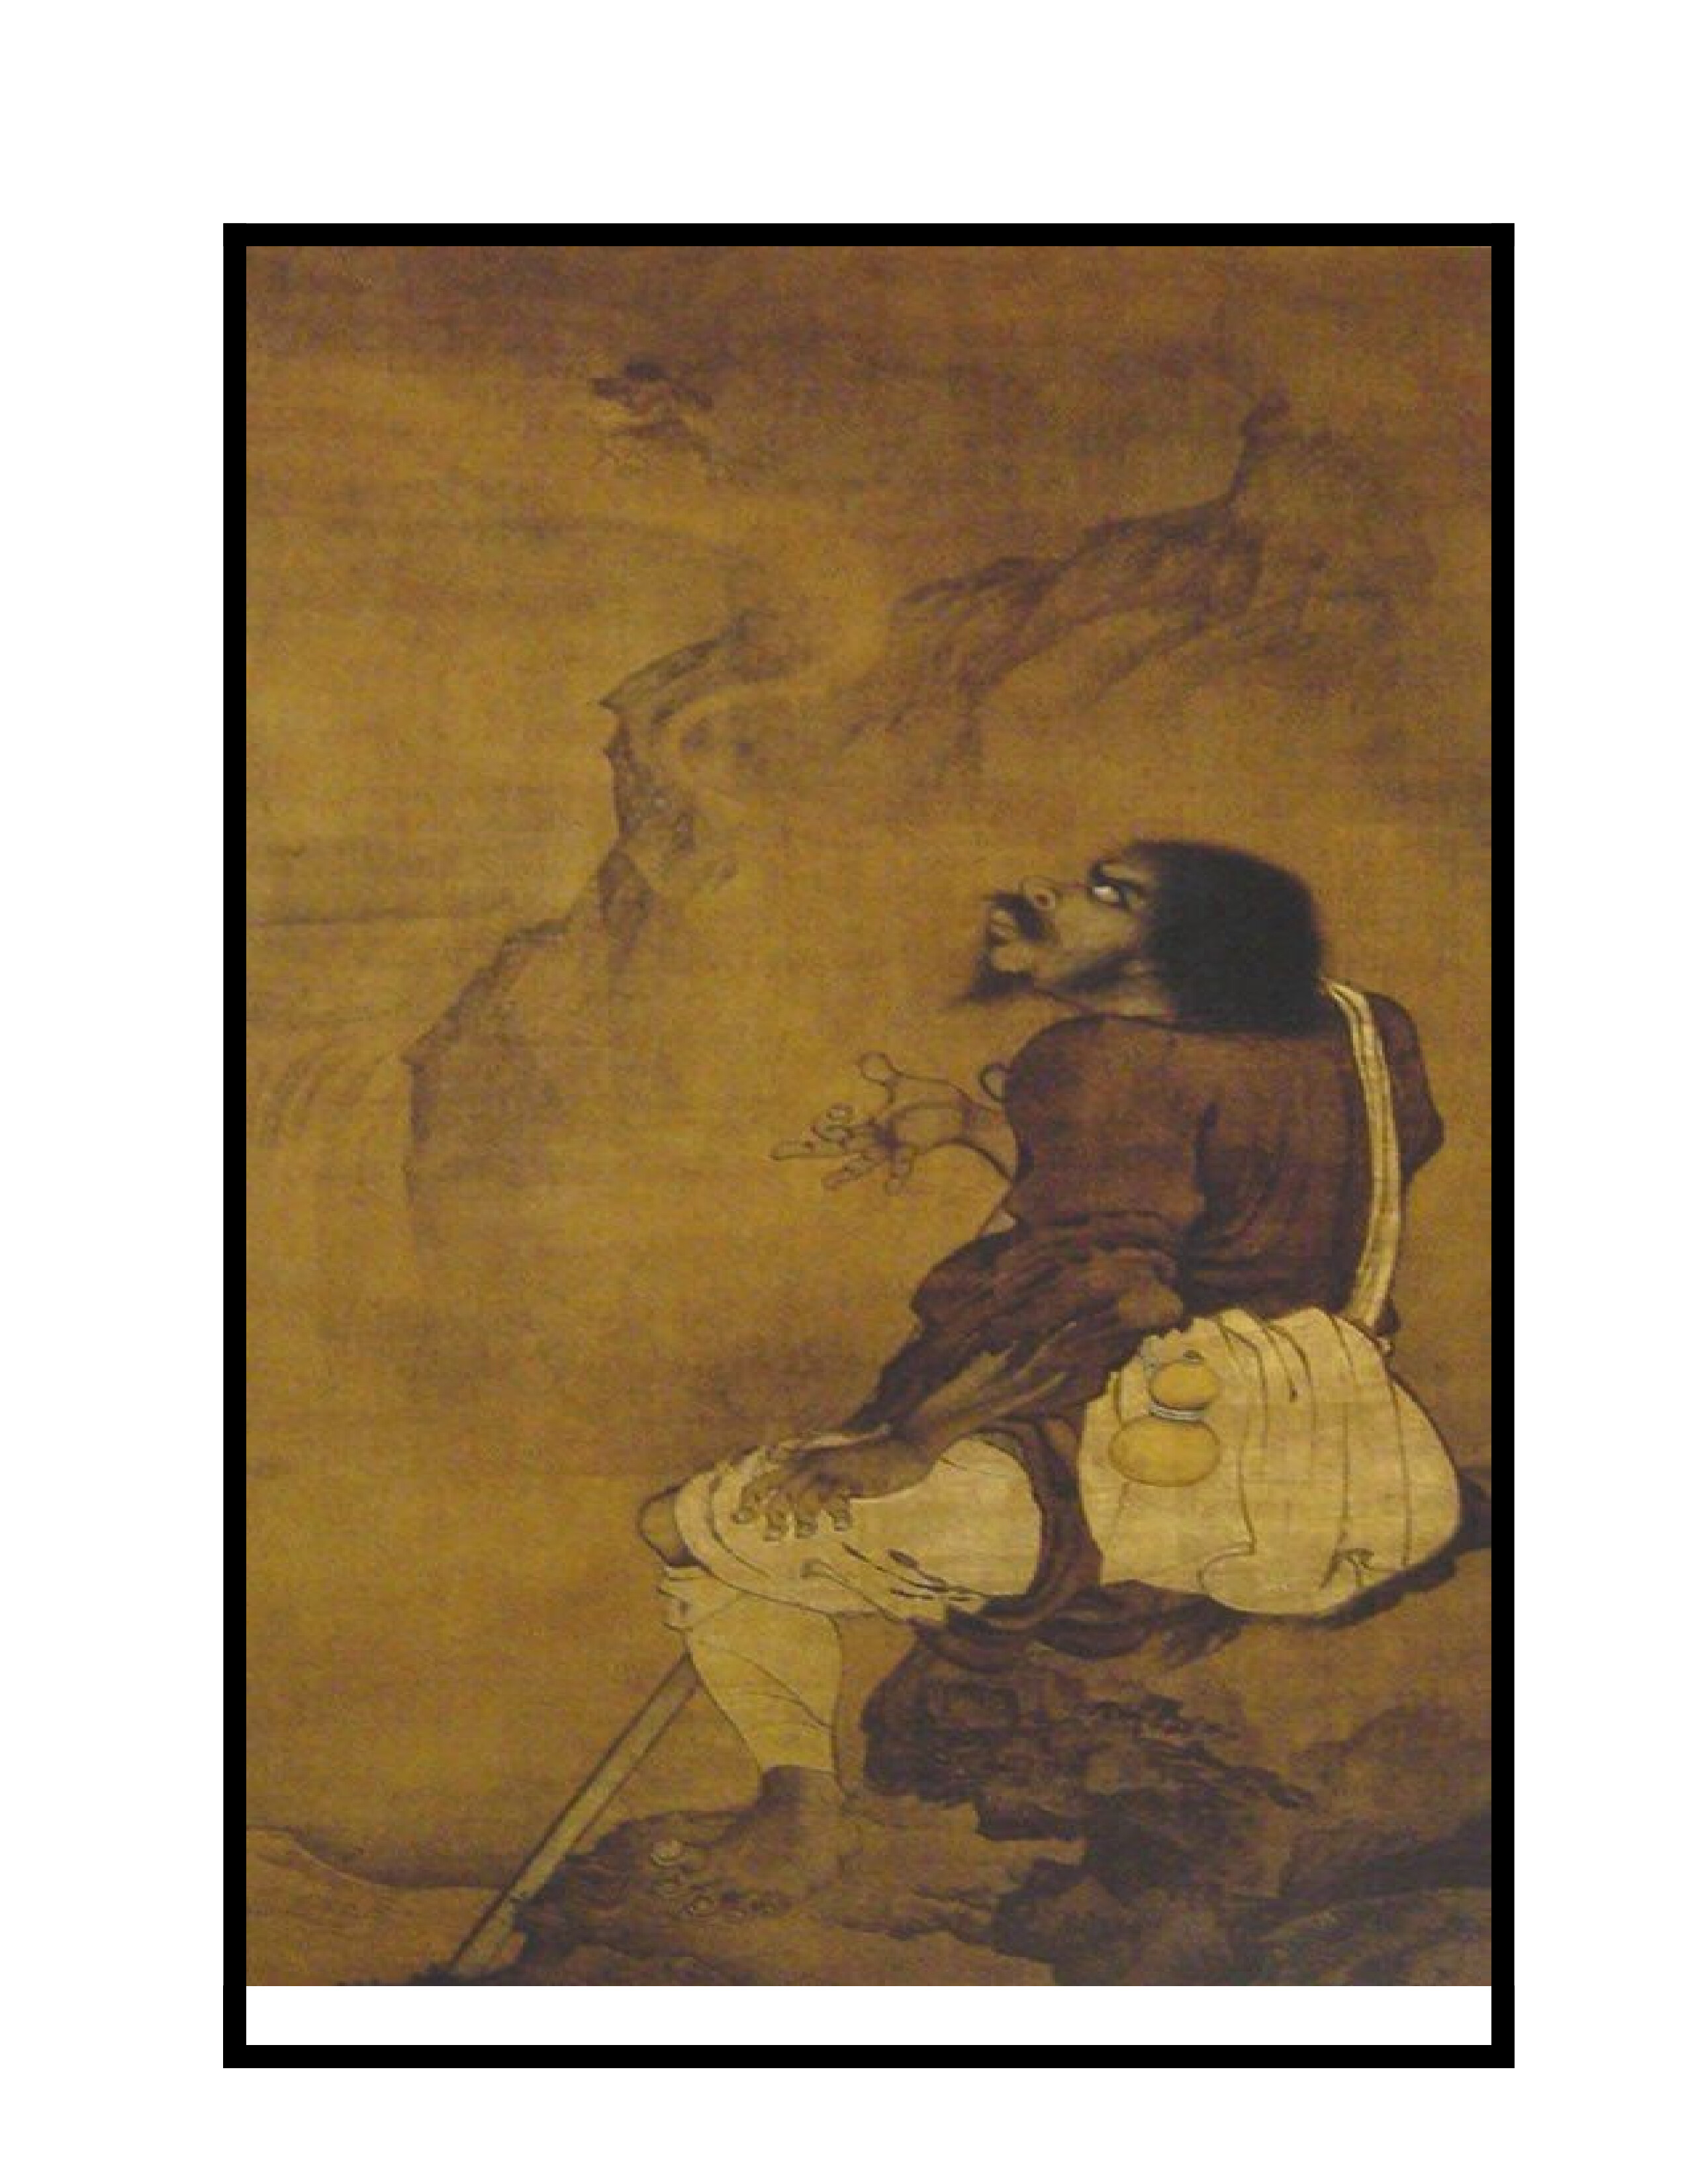 Li Tieliguai, mythical black complexioned figure in Chinese Taoist folklore. 